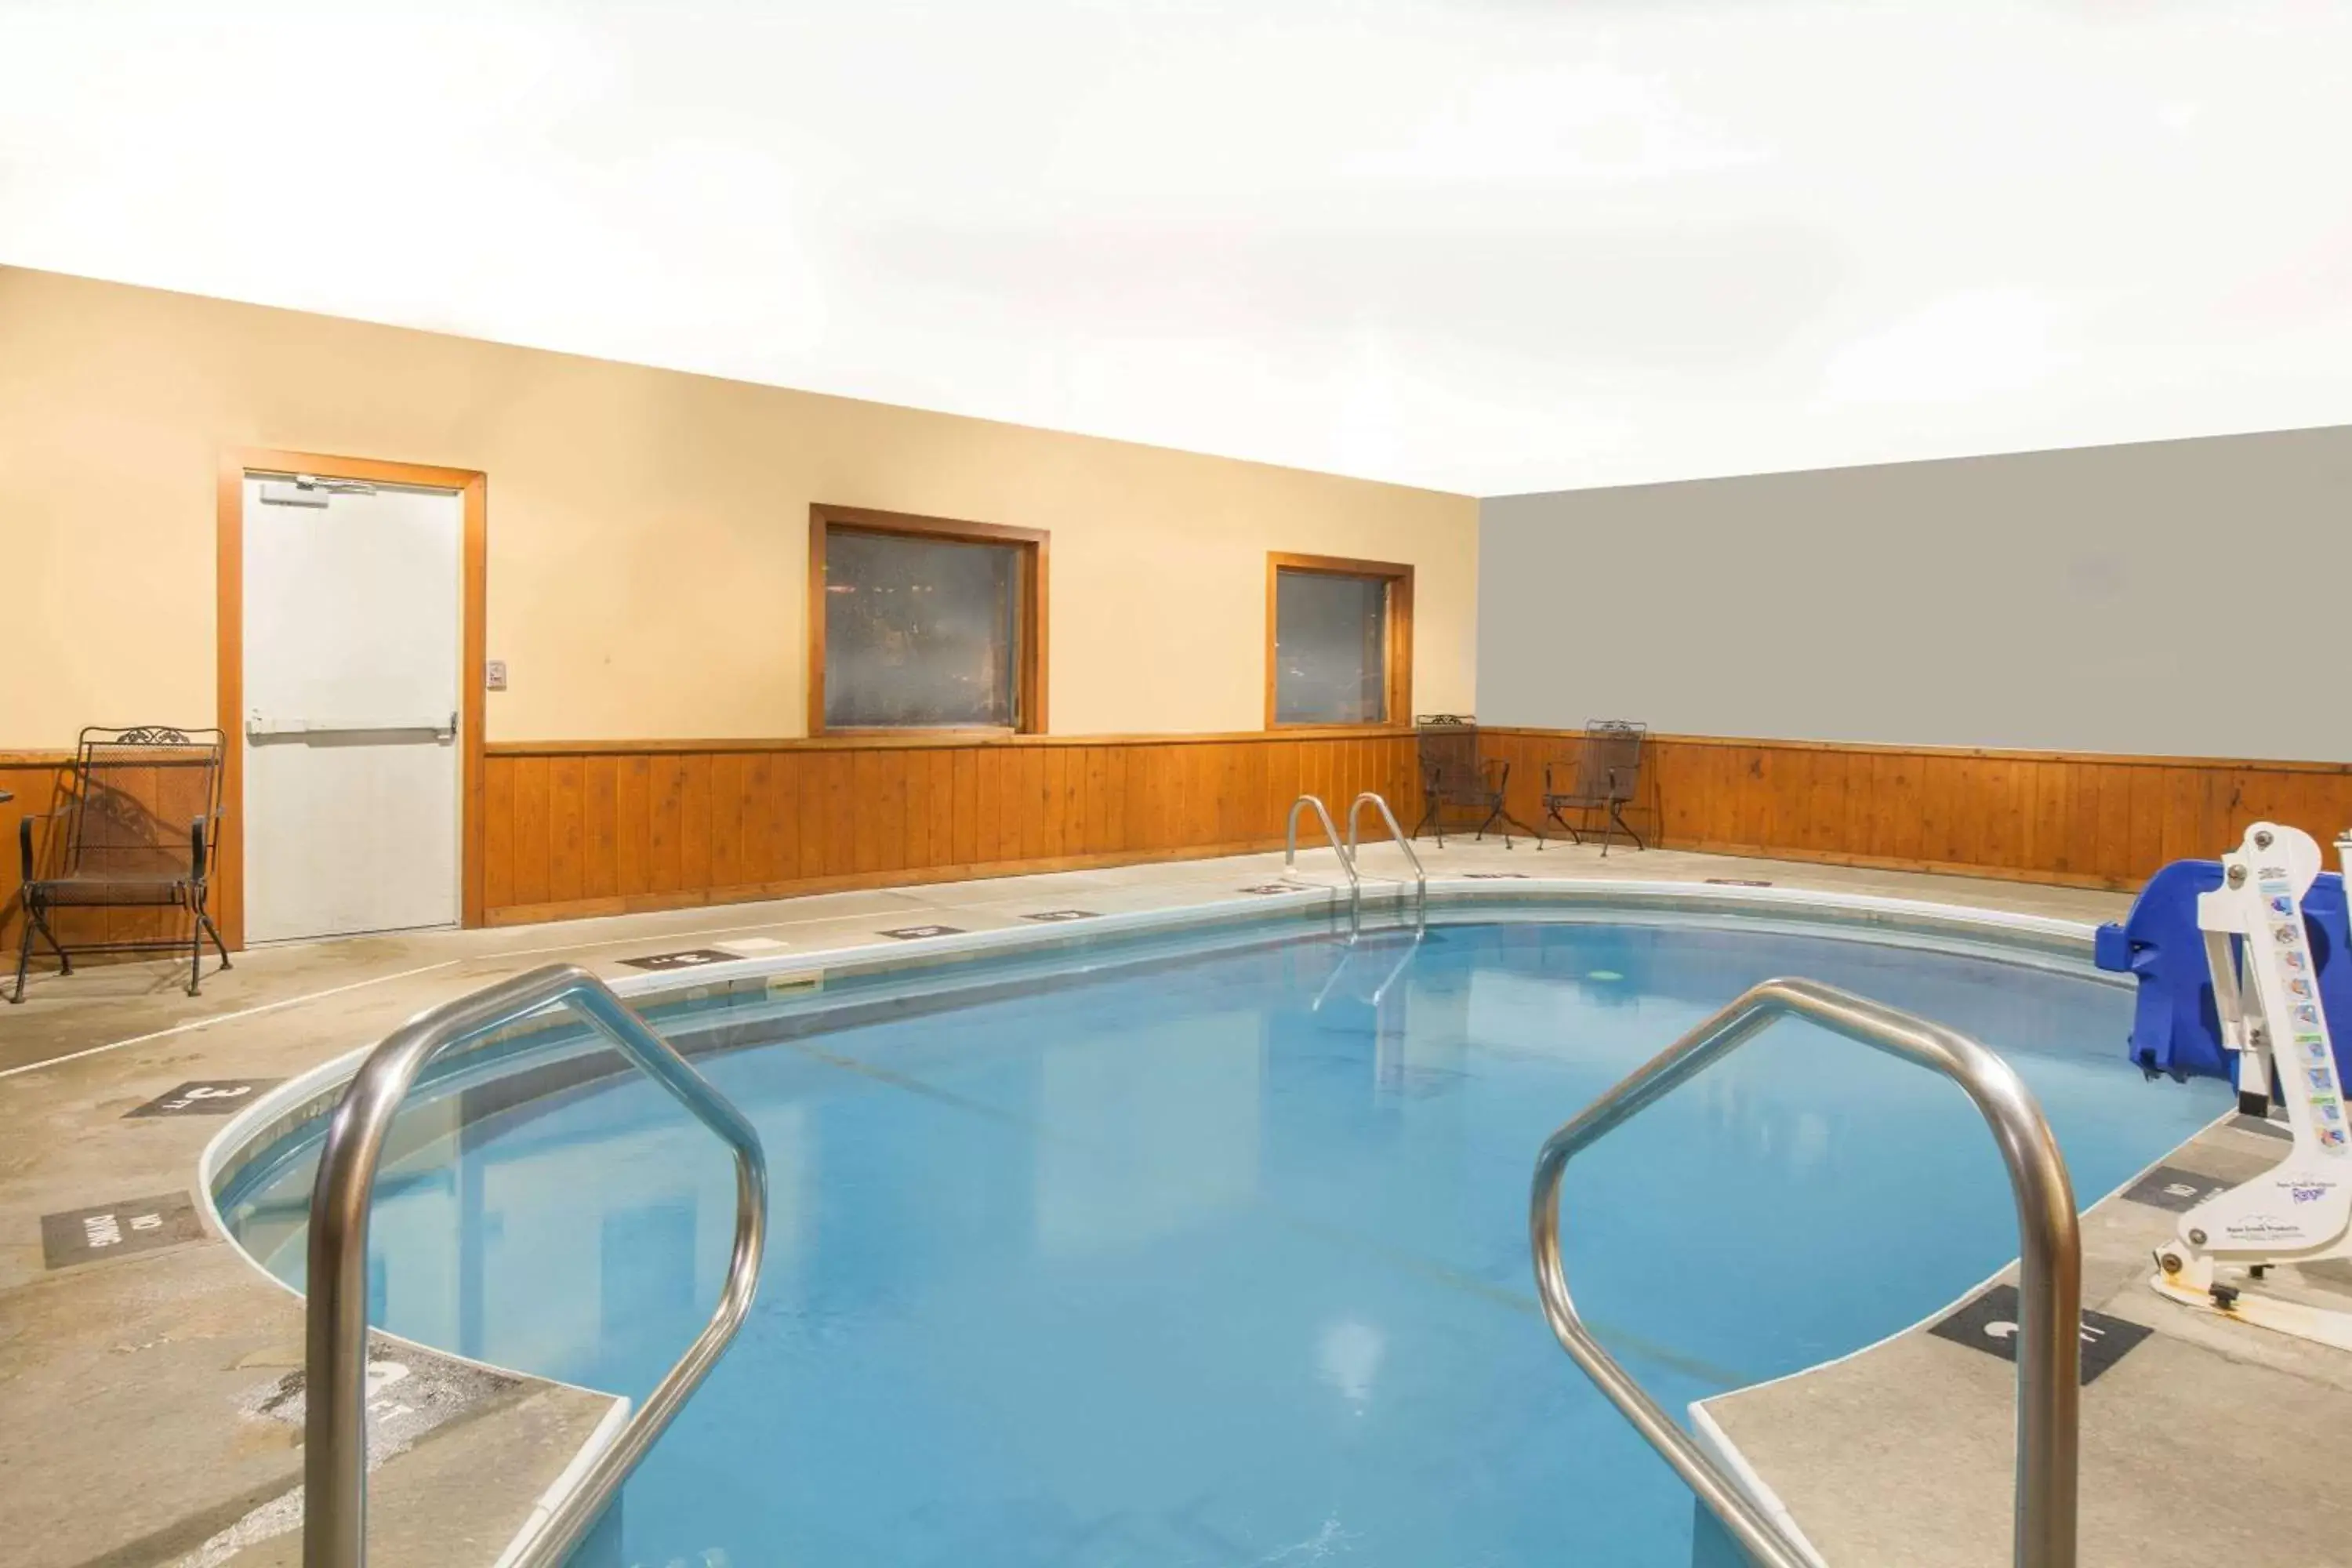 On site, Swimming Pool in Super 8 by Wyndham Mason City